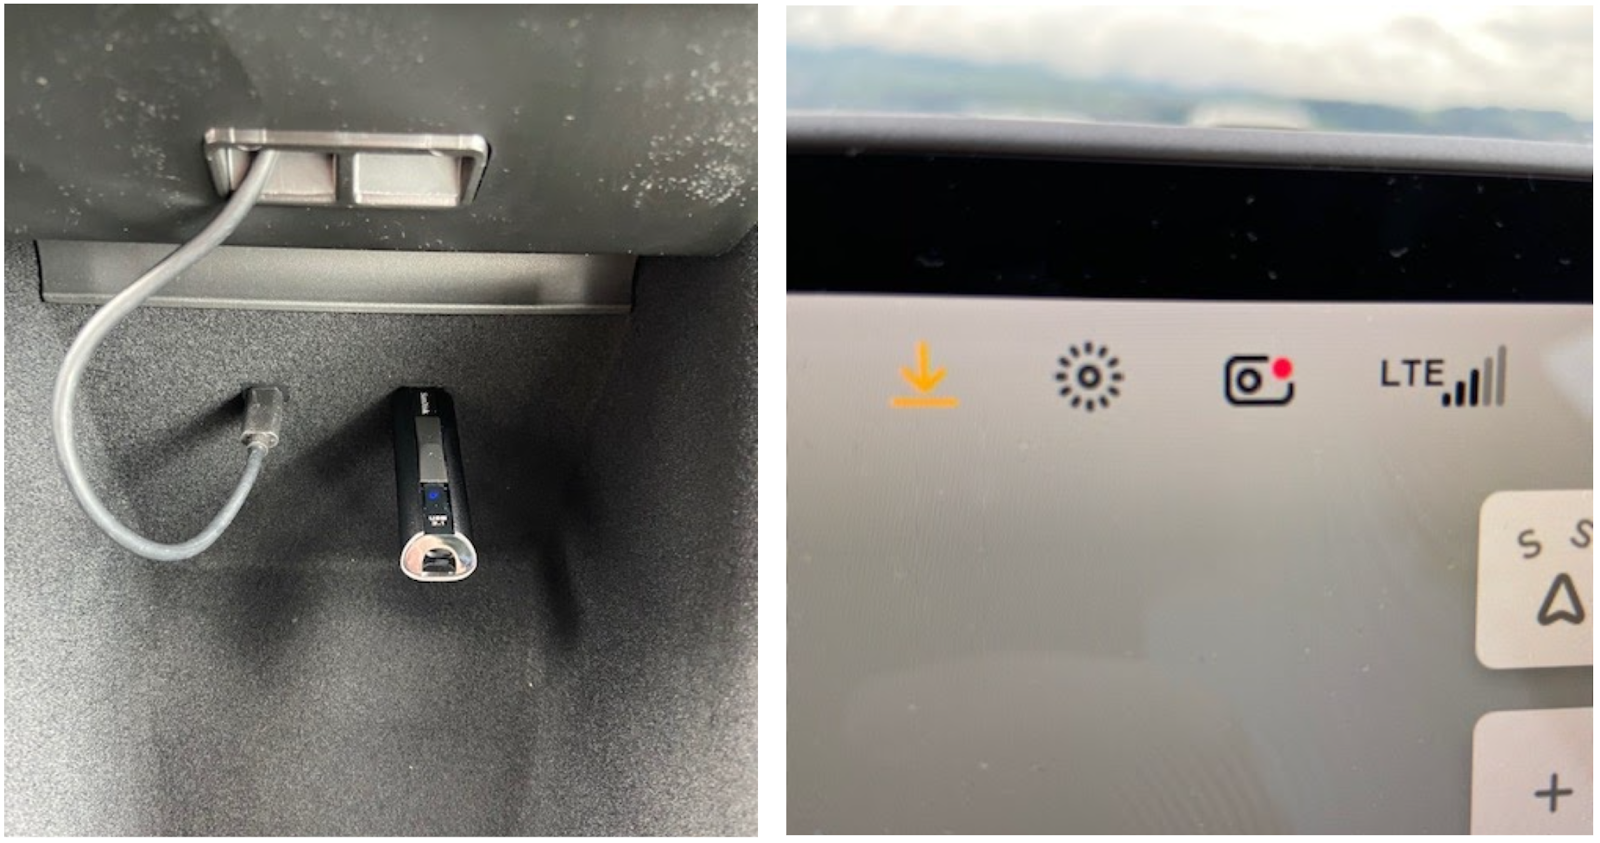 The location to plug your USB into the Tesla.